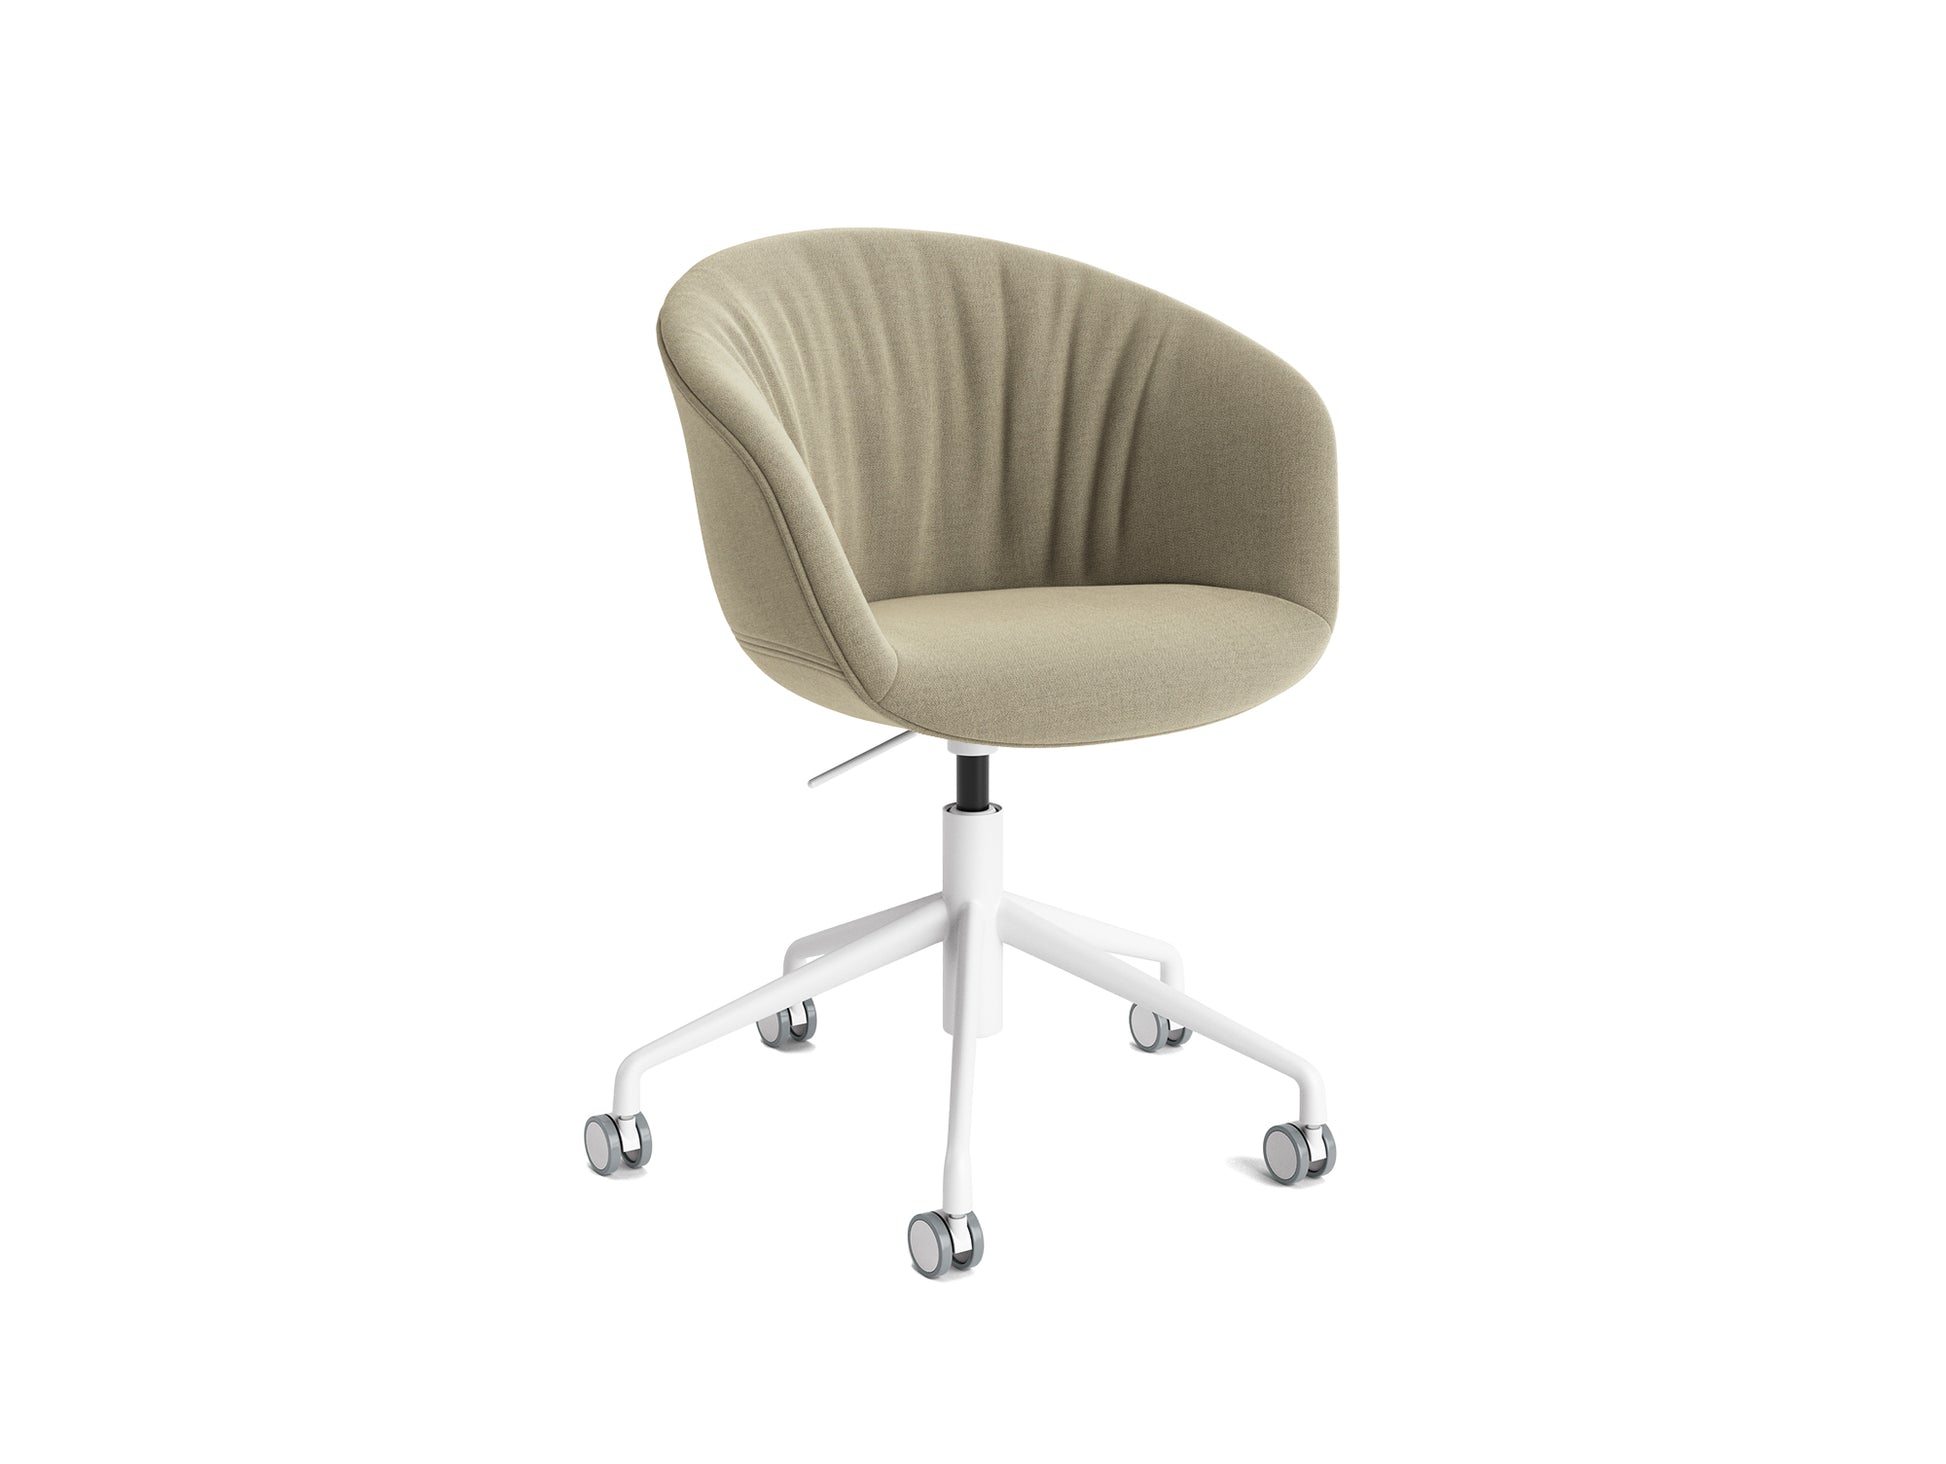 About A Chair AAC 53 Soft by HAY - Atlas 411 / White Powder Coated Aluminium